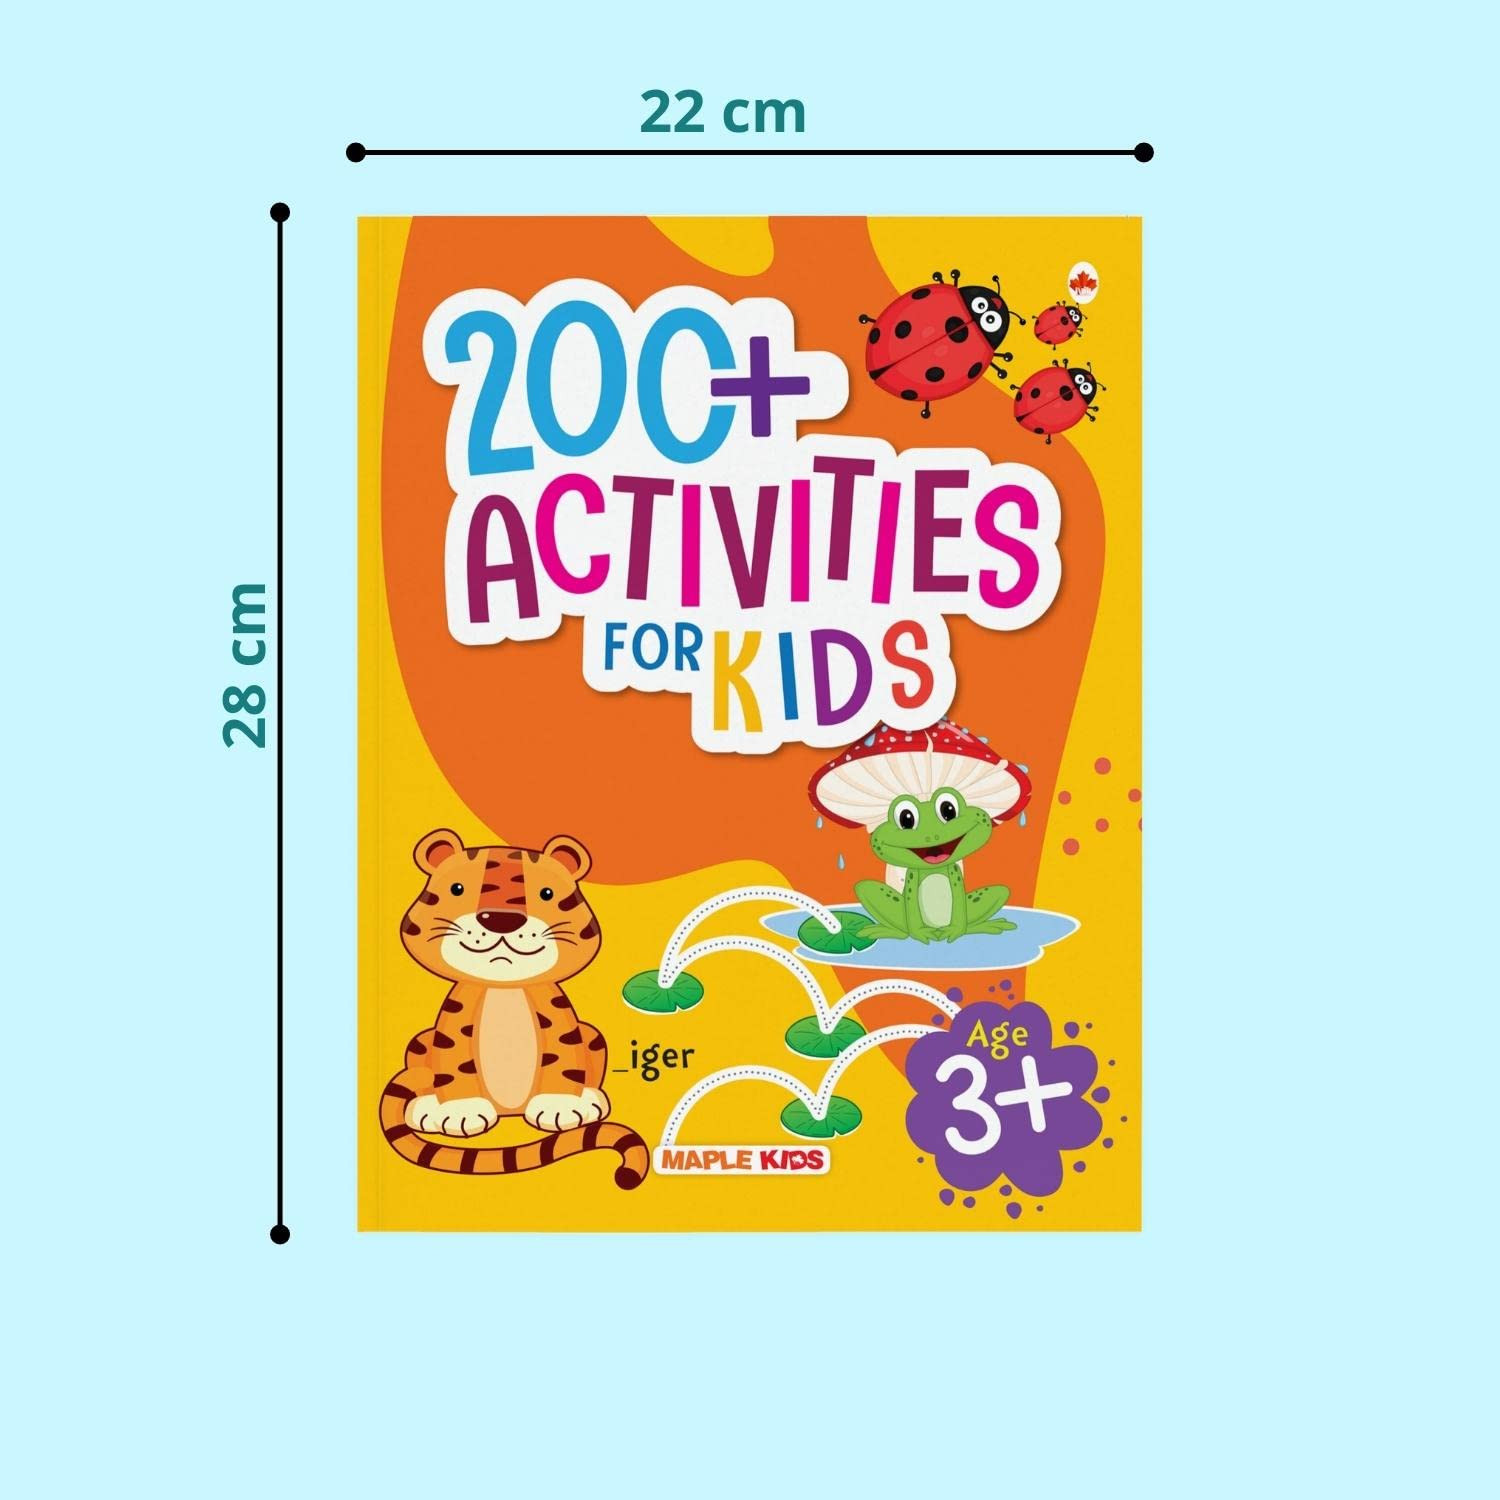 Brain Activity Book for Kids - 200+ Activities for Age 3+,Size